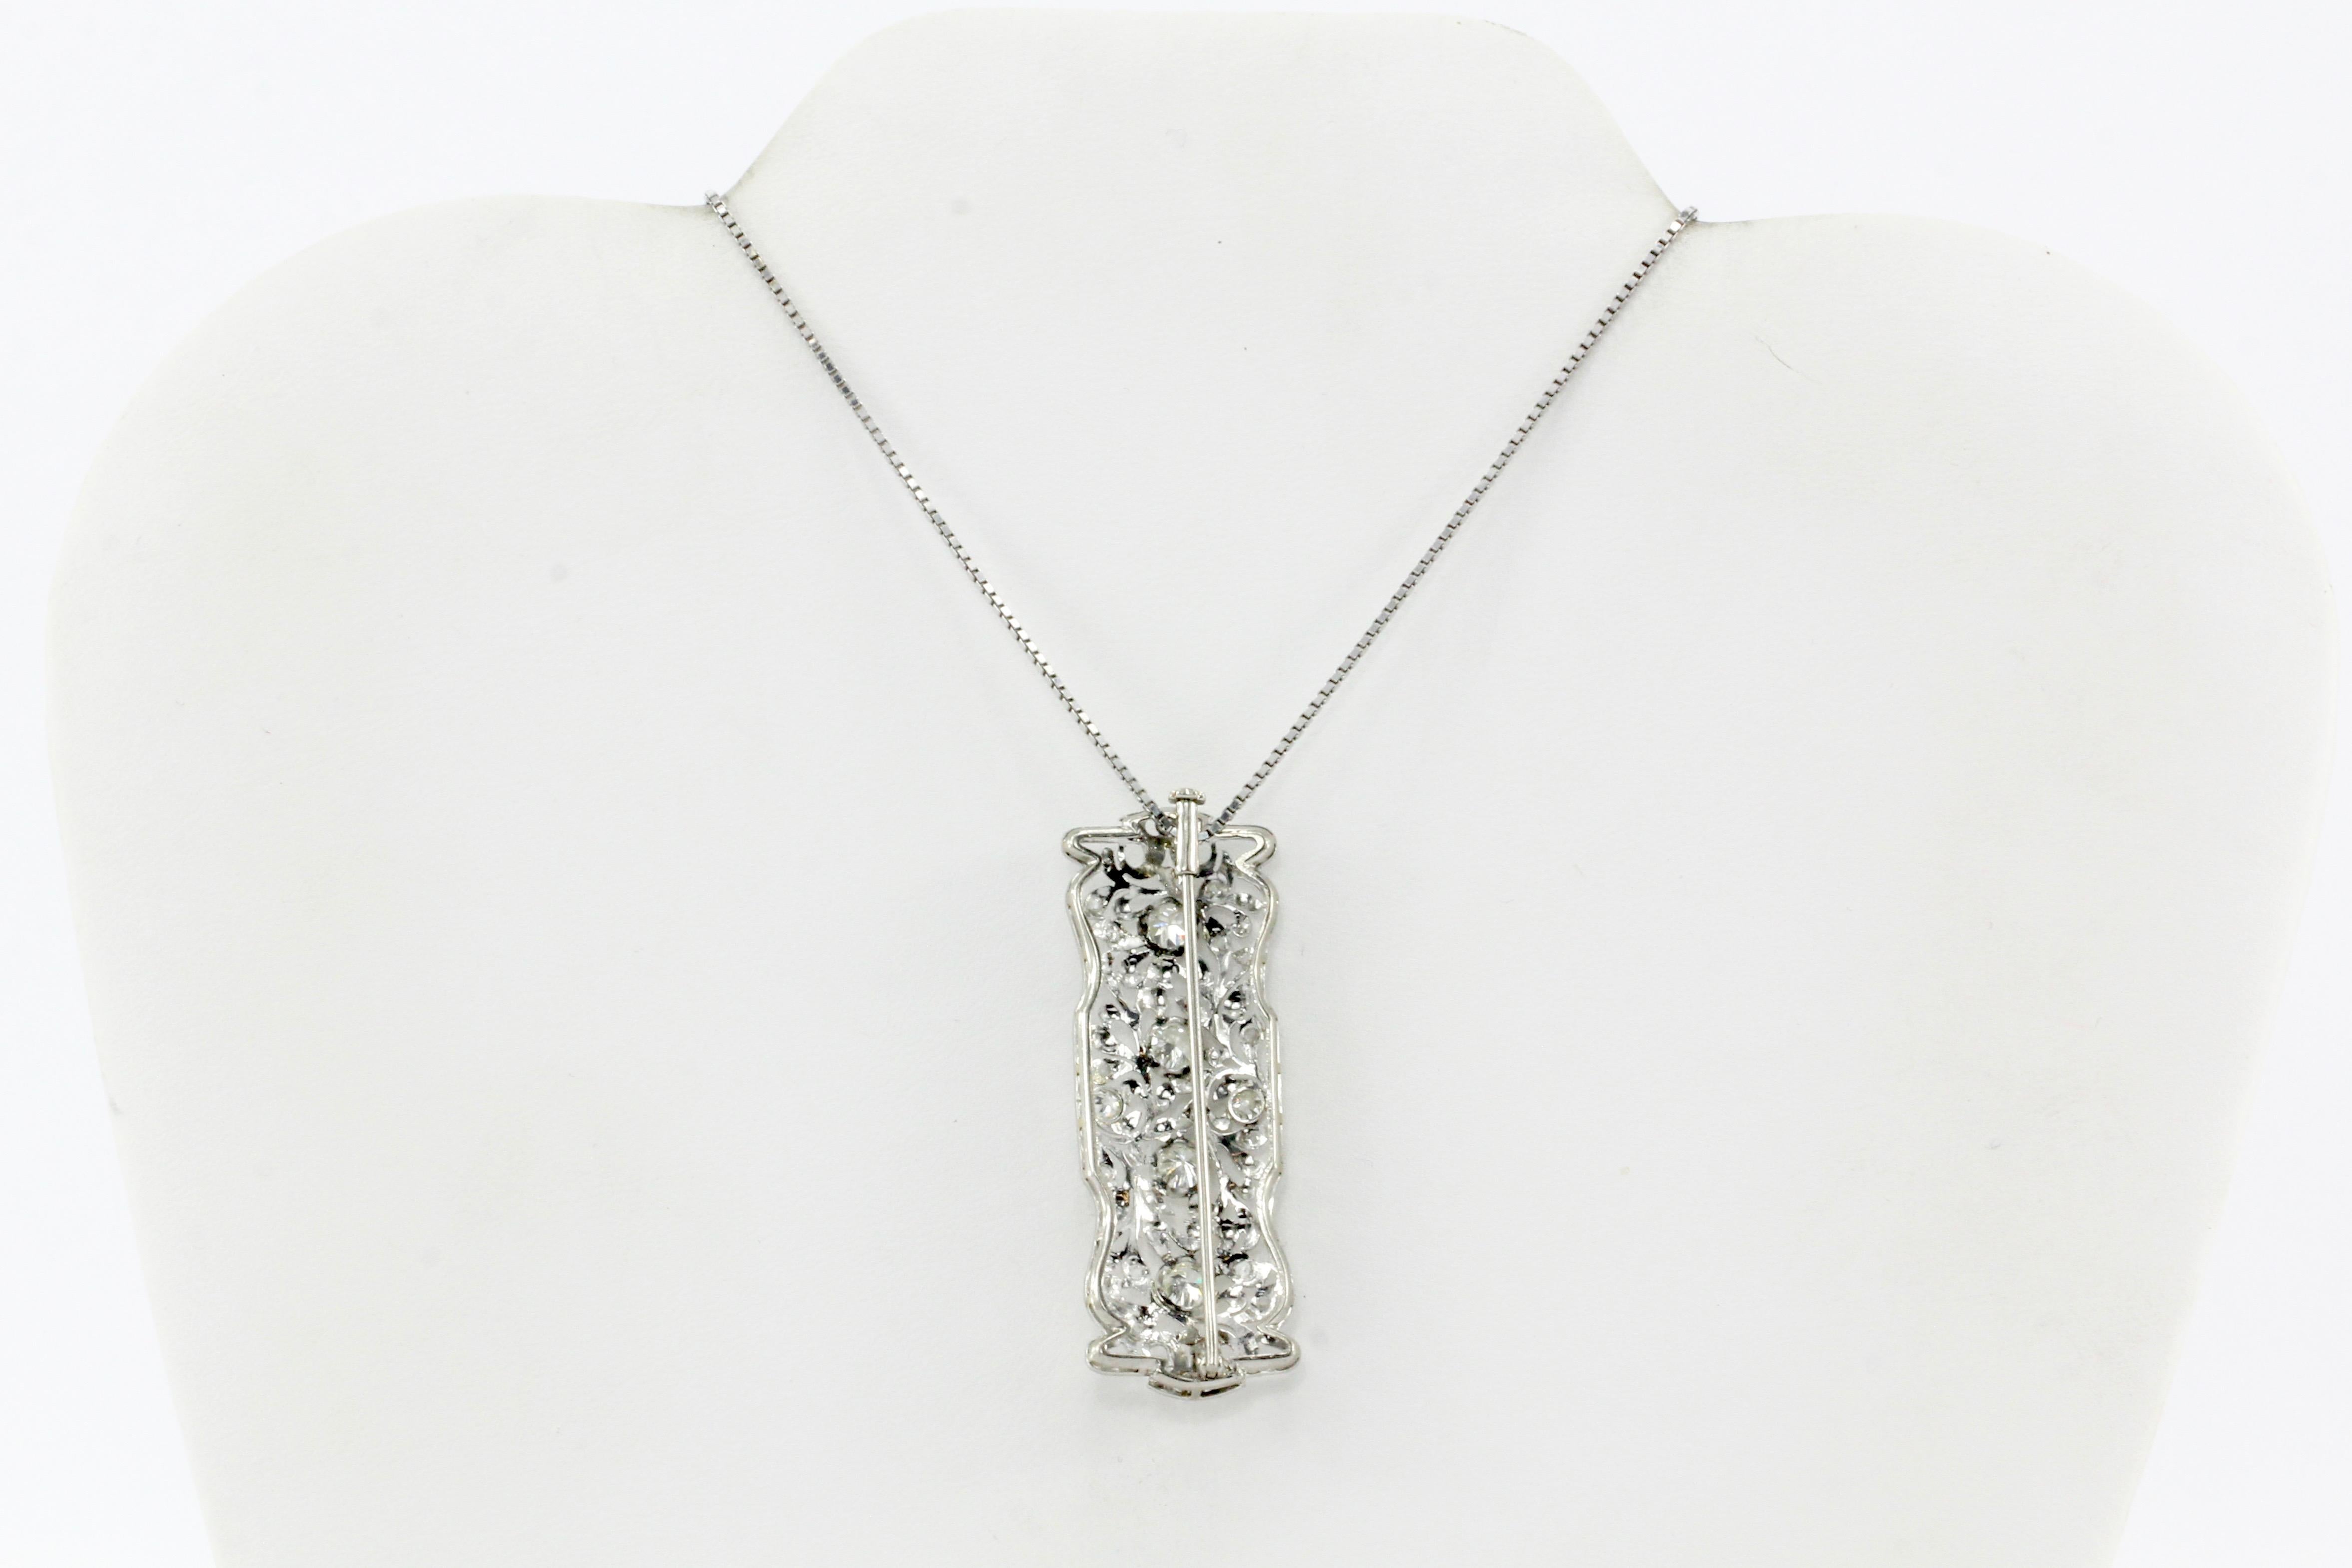 Era: Art Deco

Hallmarks: 750 (on chain)

Composition: Platinum Pendant, 18K White Gold Chain

Primary Stone: Diamond

Stone Carat: Approximately 1 Carats Total Weight

Color / Clarity: J/L - VS2-I1

Shape: Rounds

Accent Stone: Diamond

Total